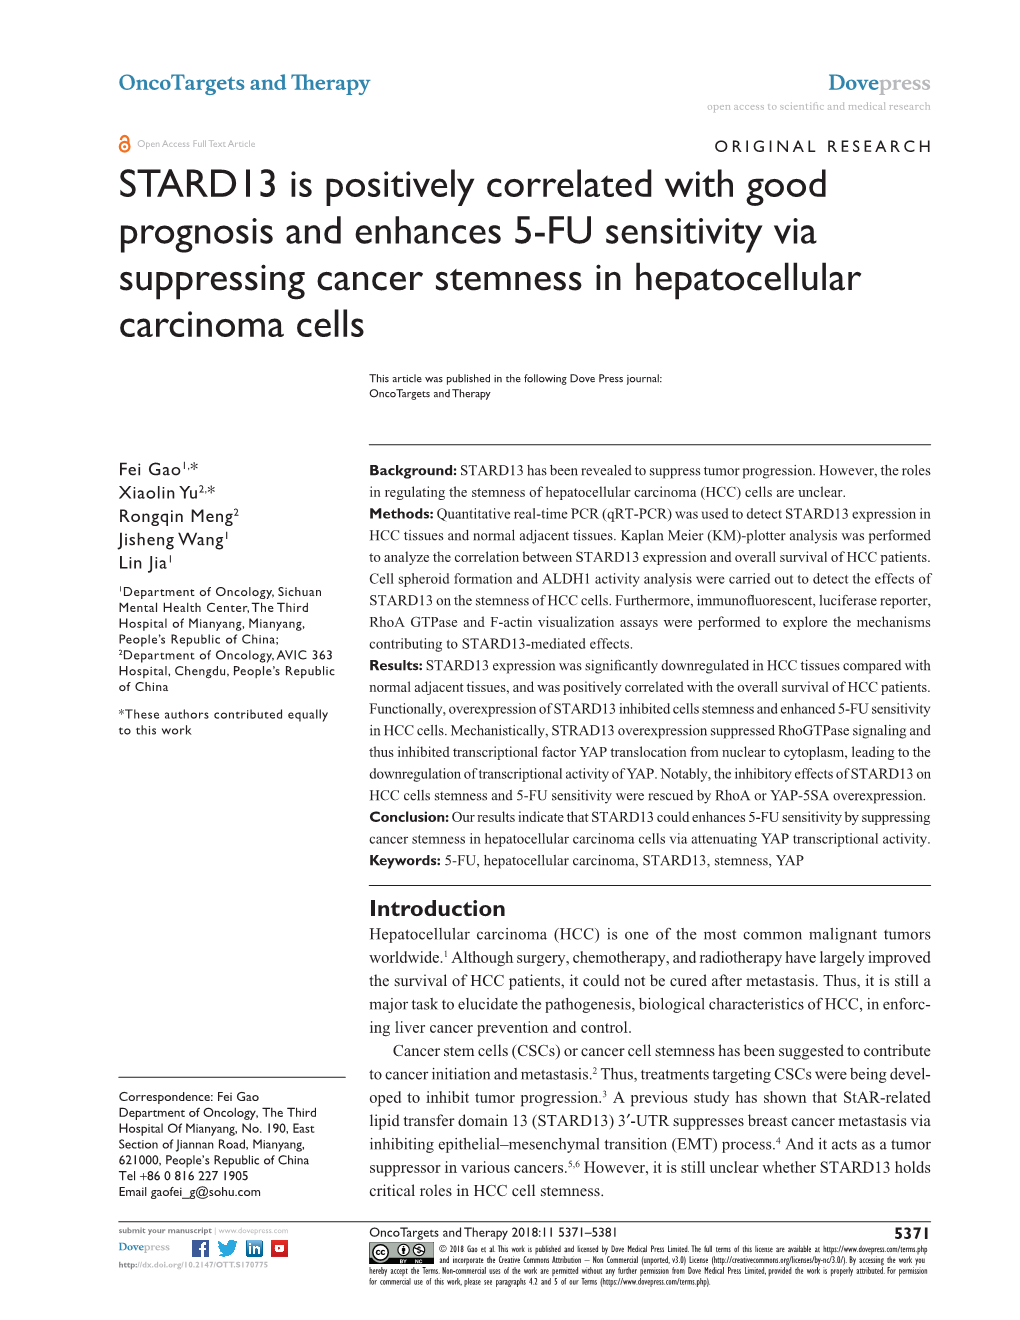 STARD13 Is Positively Correlated with Good Prognosis and Enhances 5-FU Sensitivity Via Suppressing Cancer Stemness in Hepatocellular Carcinoma Cells